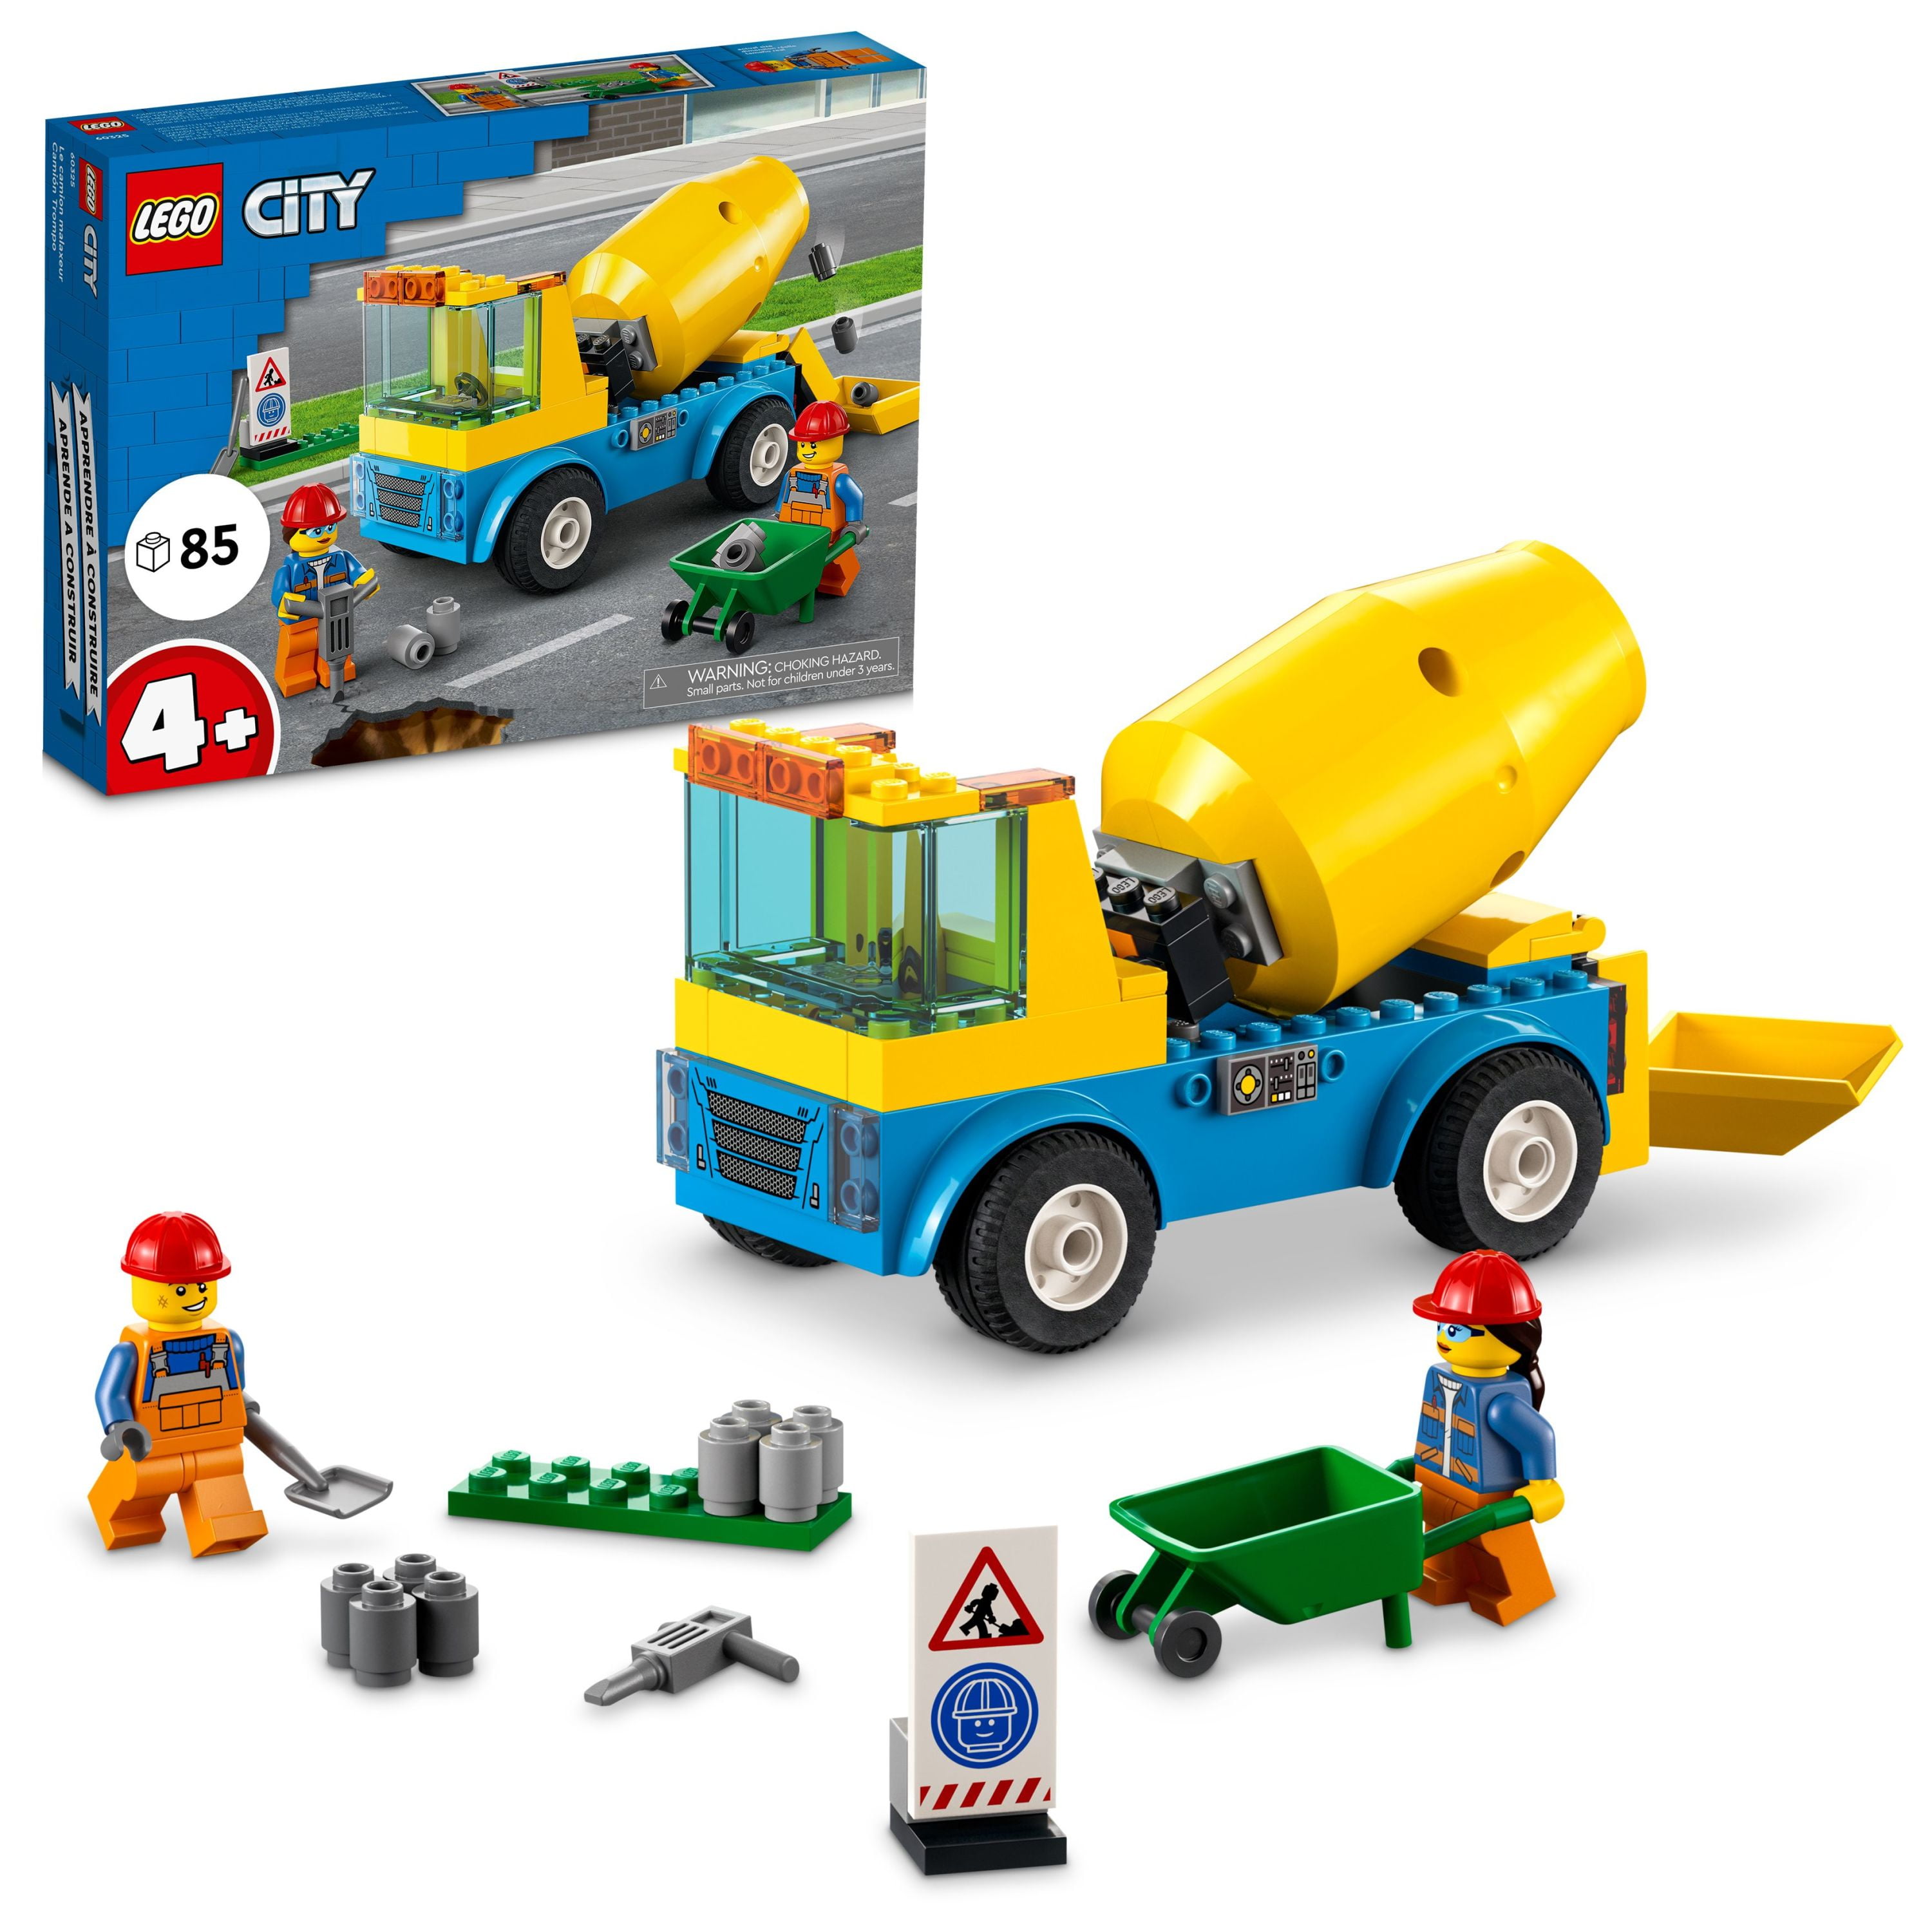 LEGO City Great Vehicles Cement 60325 Truck Toy, Construction Vehicle Starter Building Set, Toys for Preschool Kids, Boys & Girls age 4 Plus Years Old - Walmart.com